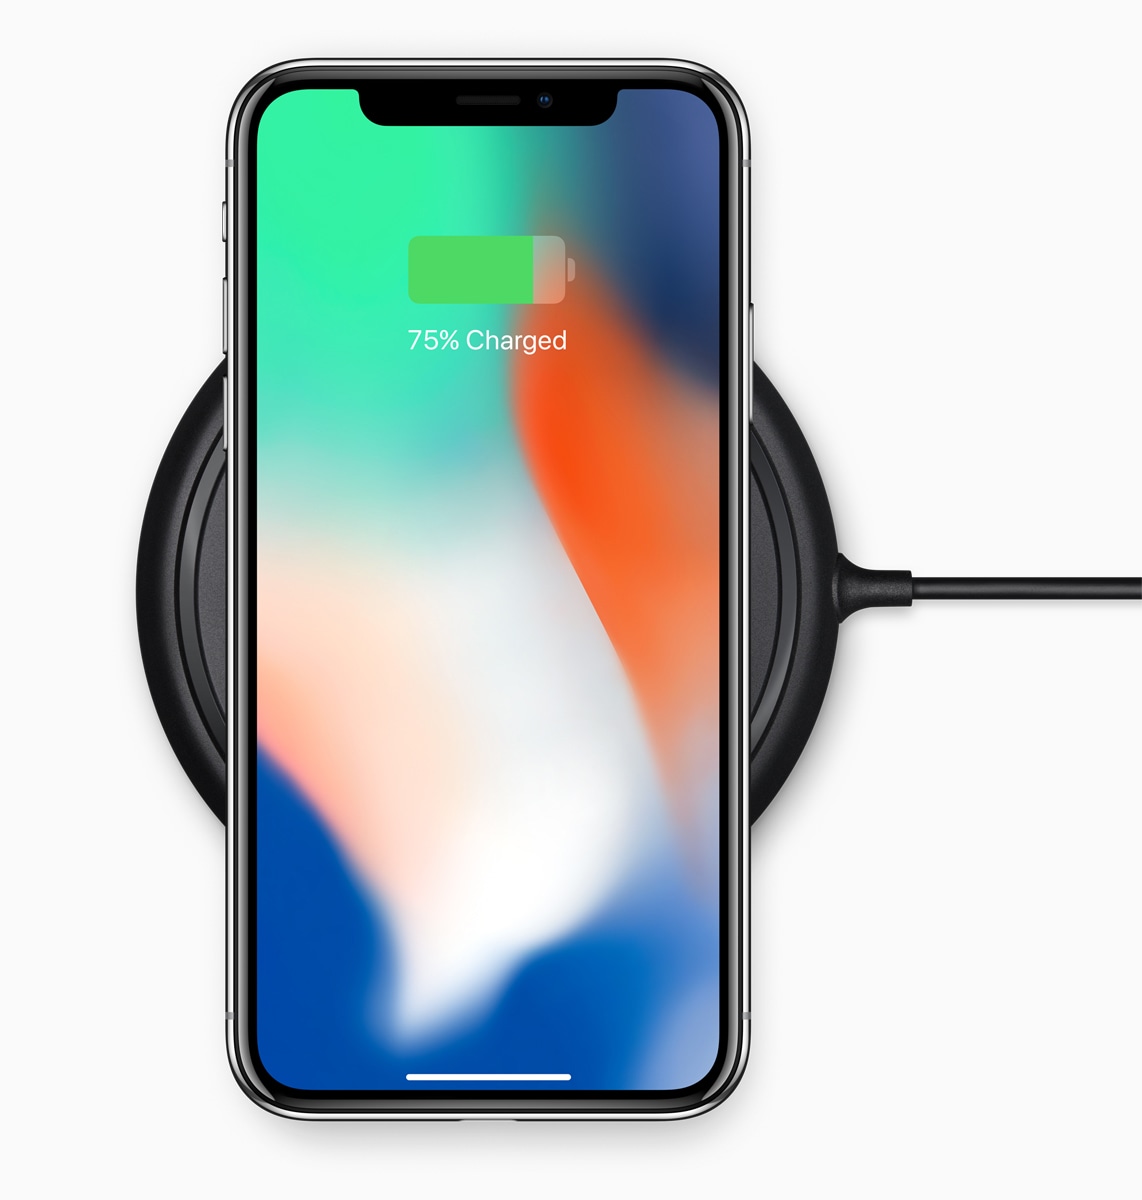 iPhone X on a wireless charging base